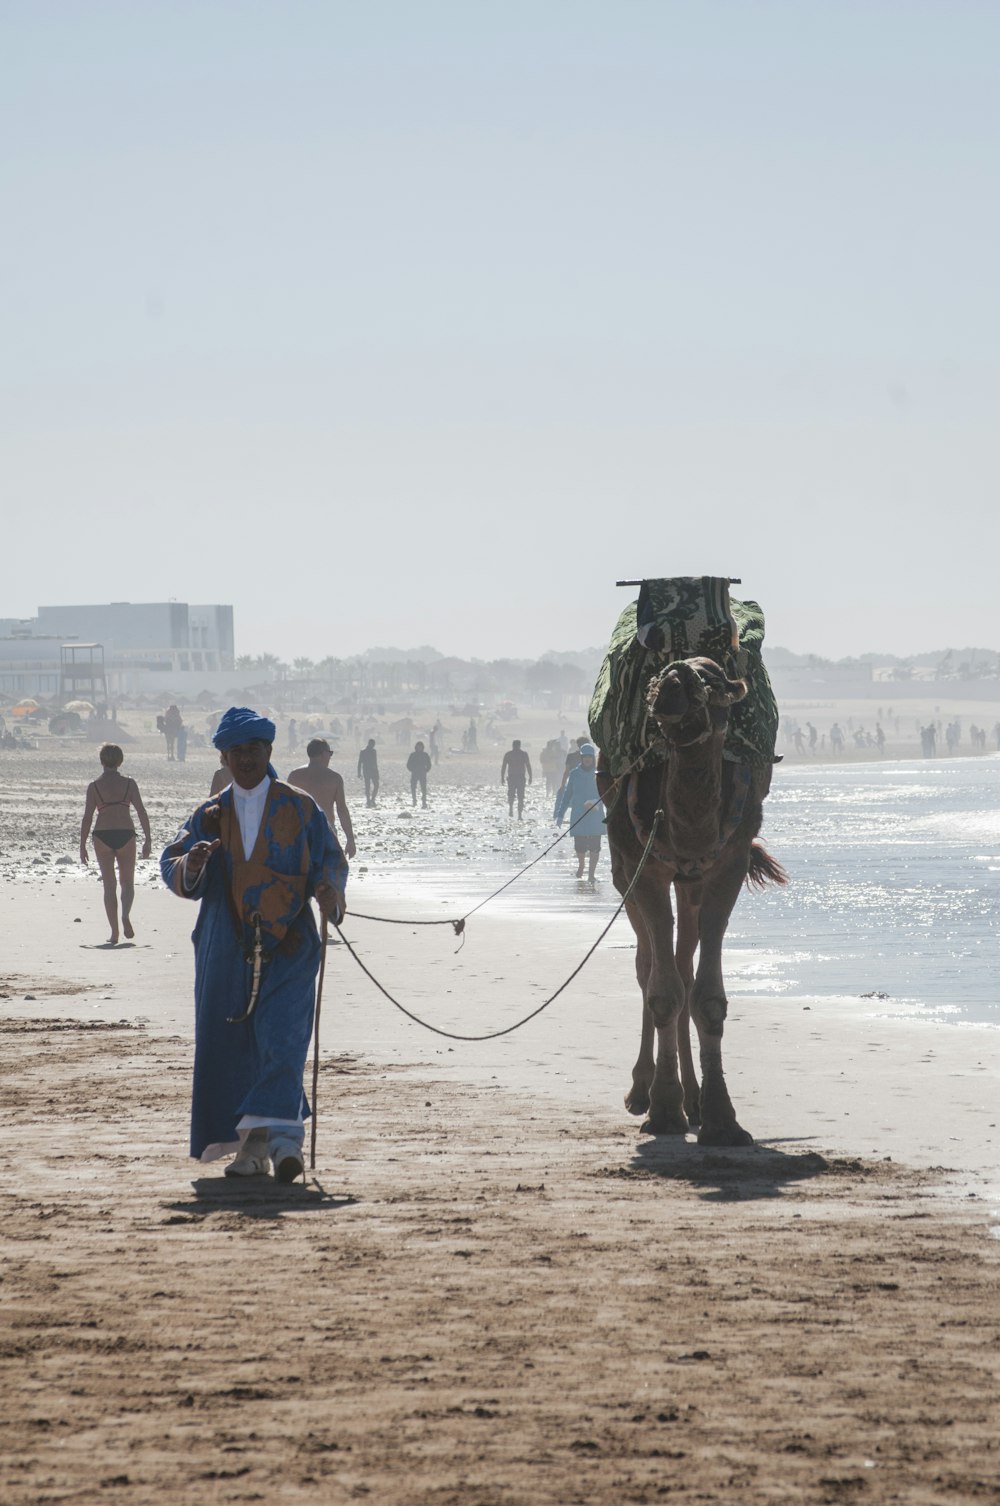 camel and people walking at the beach during day